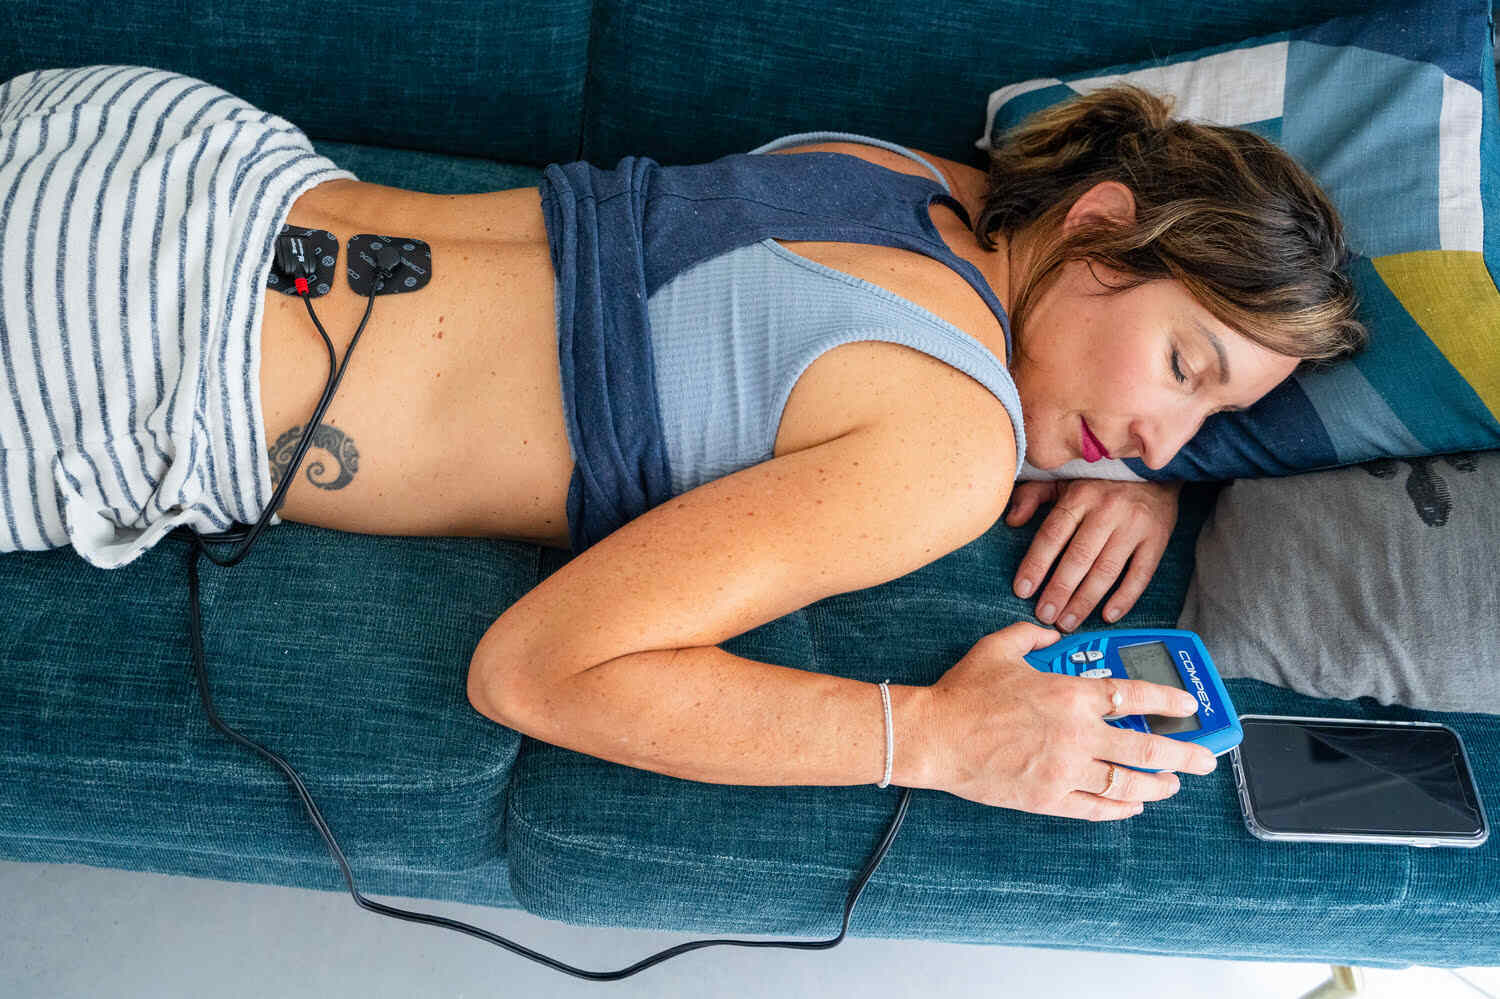 A woman treating her Lumbago using the Compex FIT 3.0 muscle stimulator